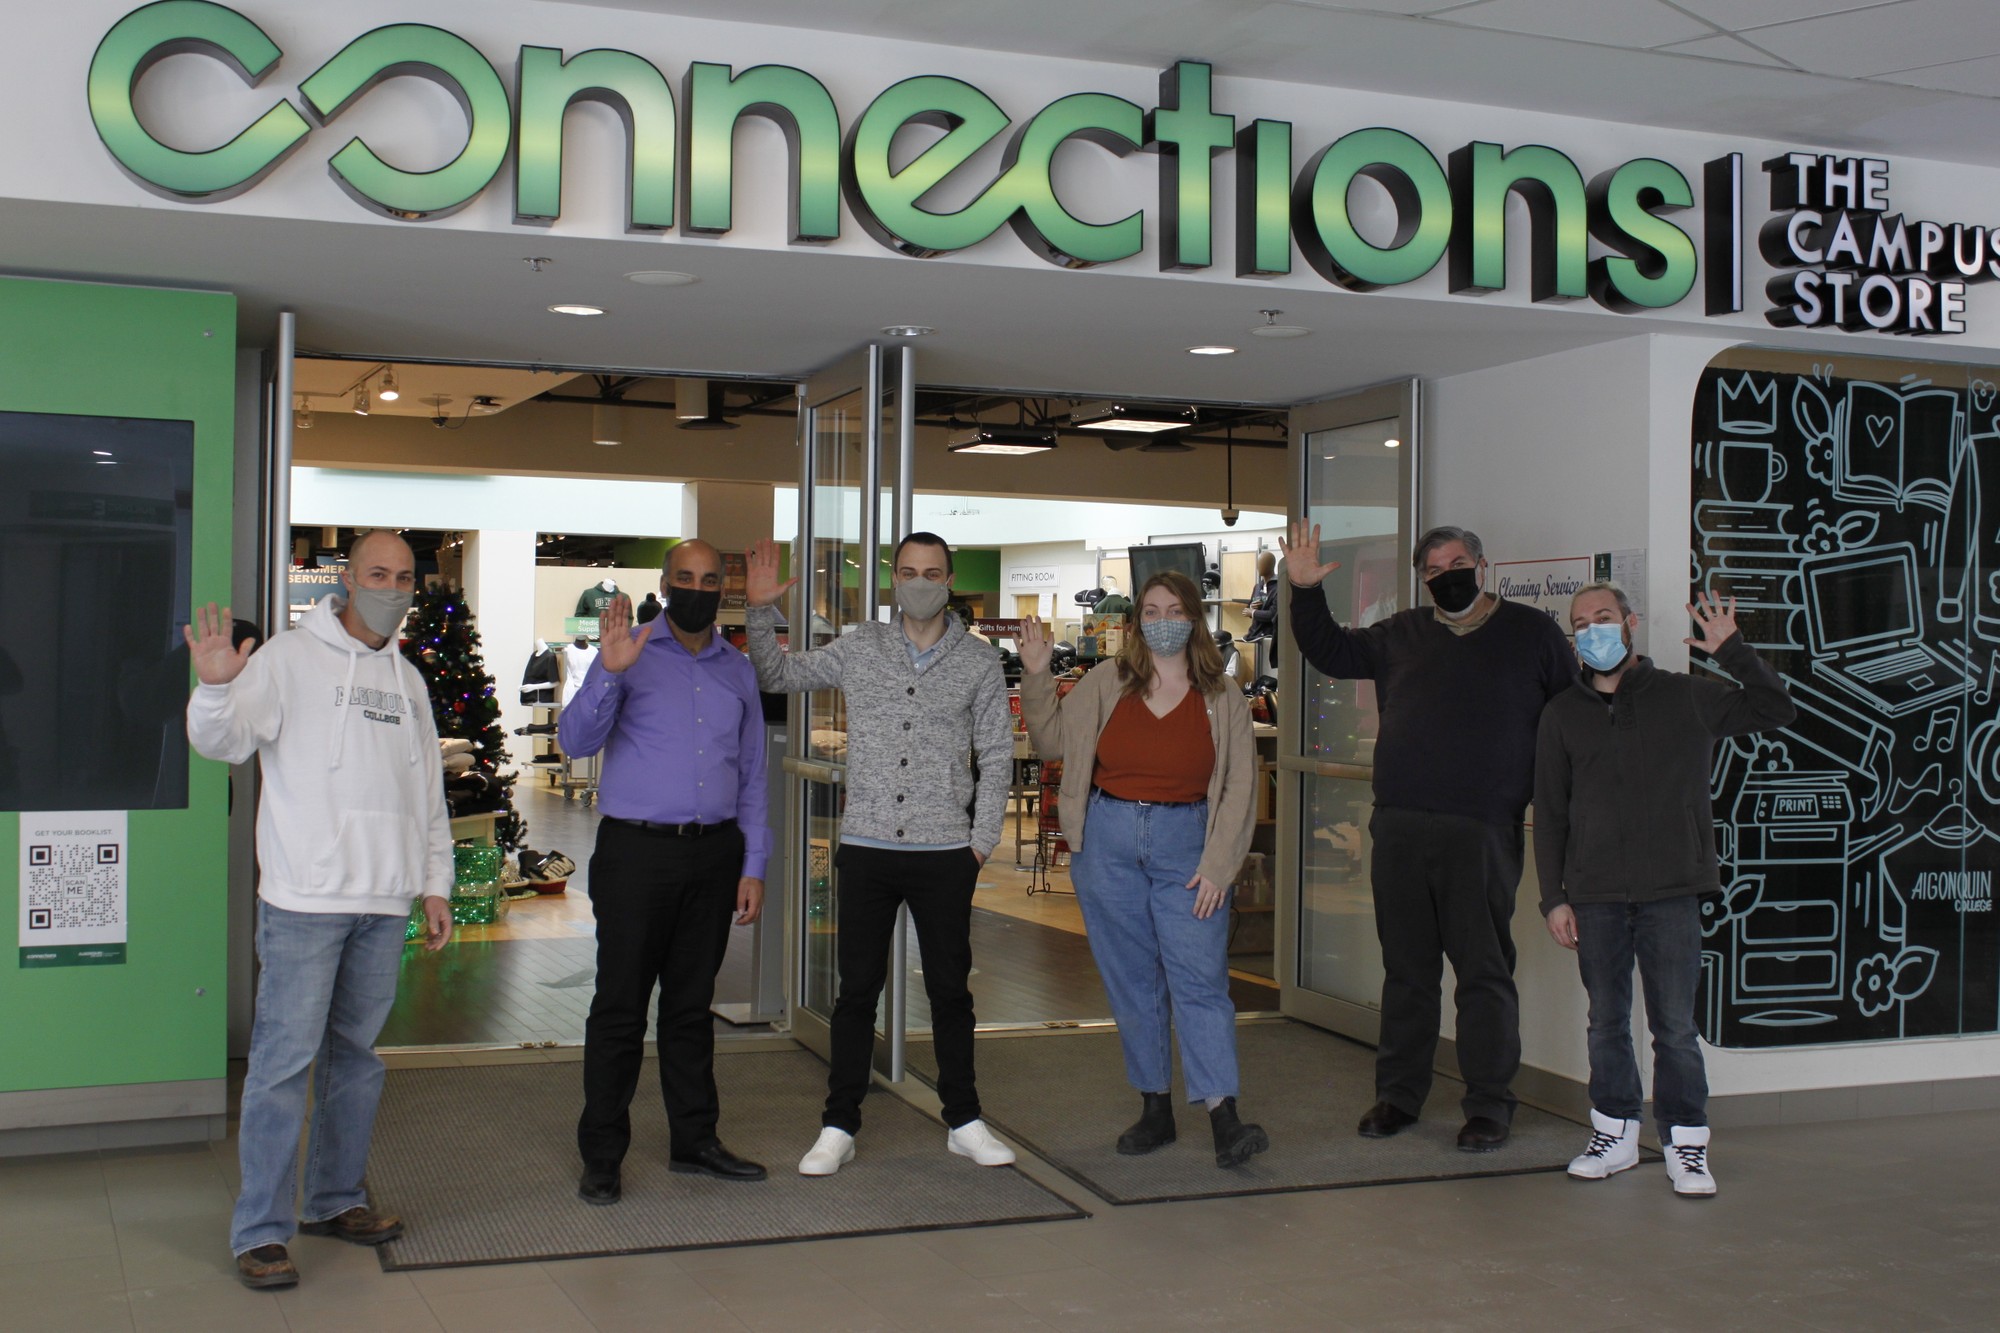 More than simply a place to pick up your textbooks and school supplies, Connections has a wide variety of products on offer, and the staff is ready to welcome you.